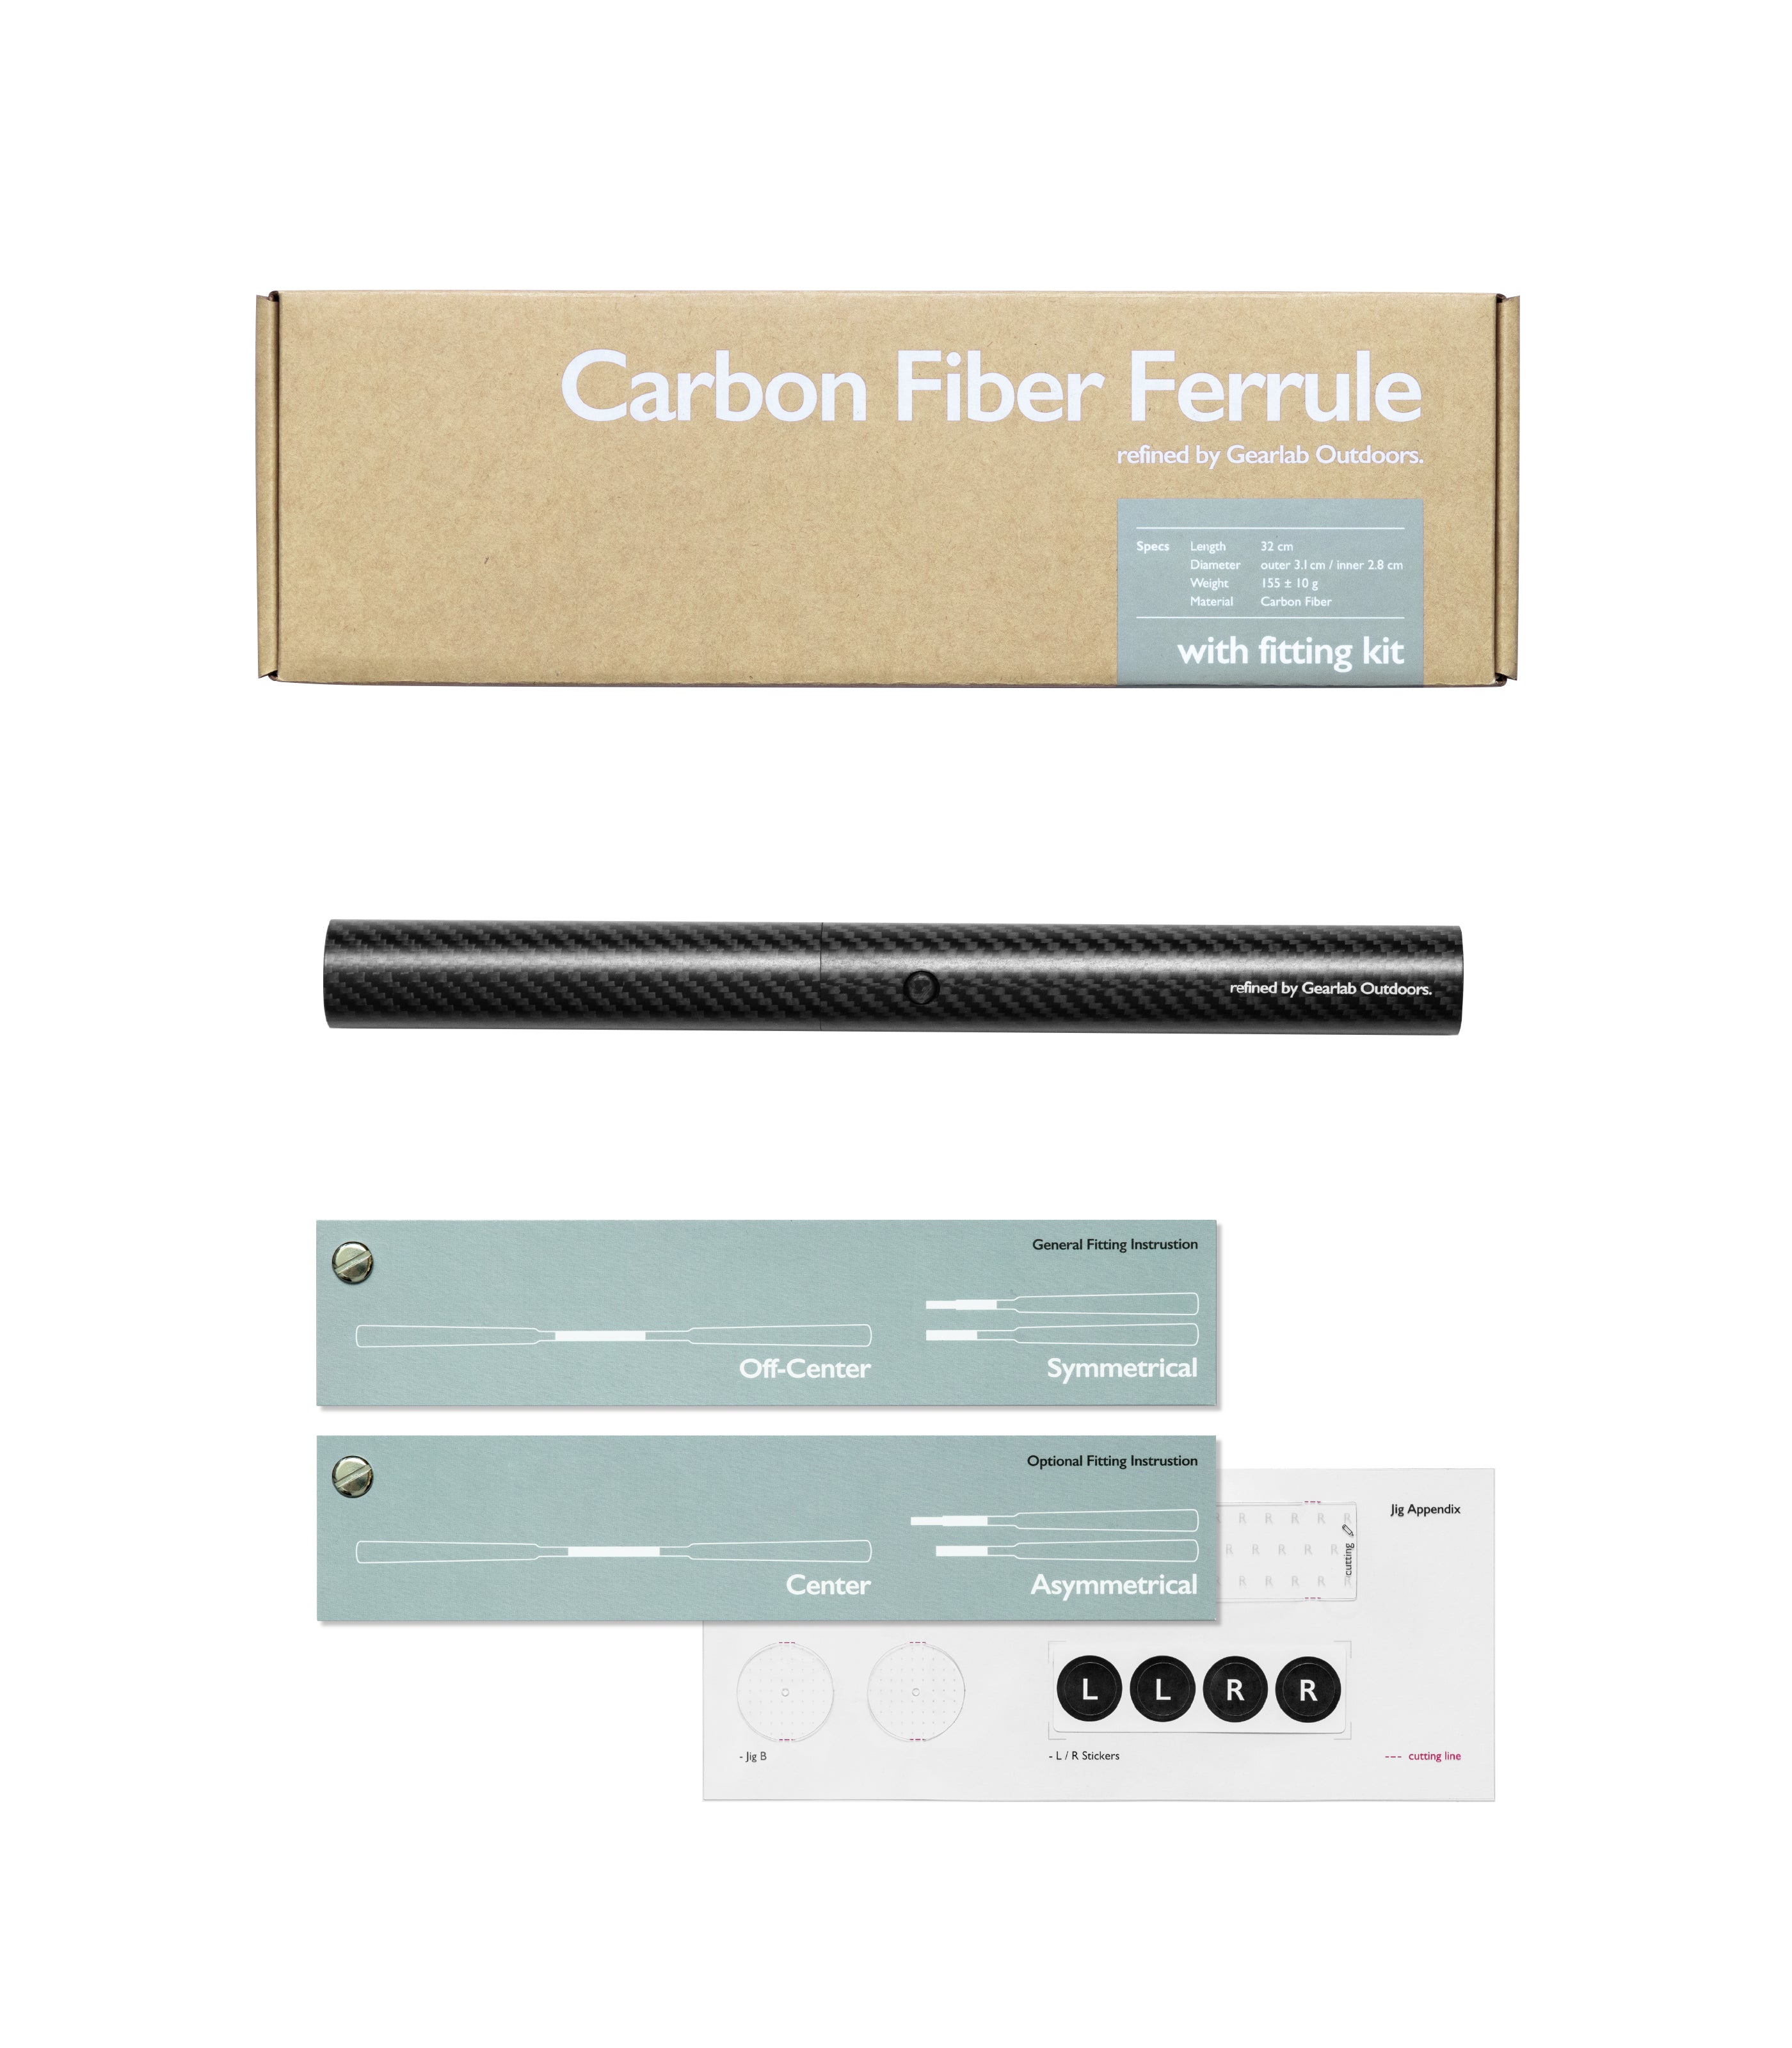 Carbon Fiber Ferrule transforms a one-piece wooden paddle into two parts for easy commute and storage. Fitting Kit and instructions included. Measure, split, and trim your wooden paddle with confidence.